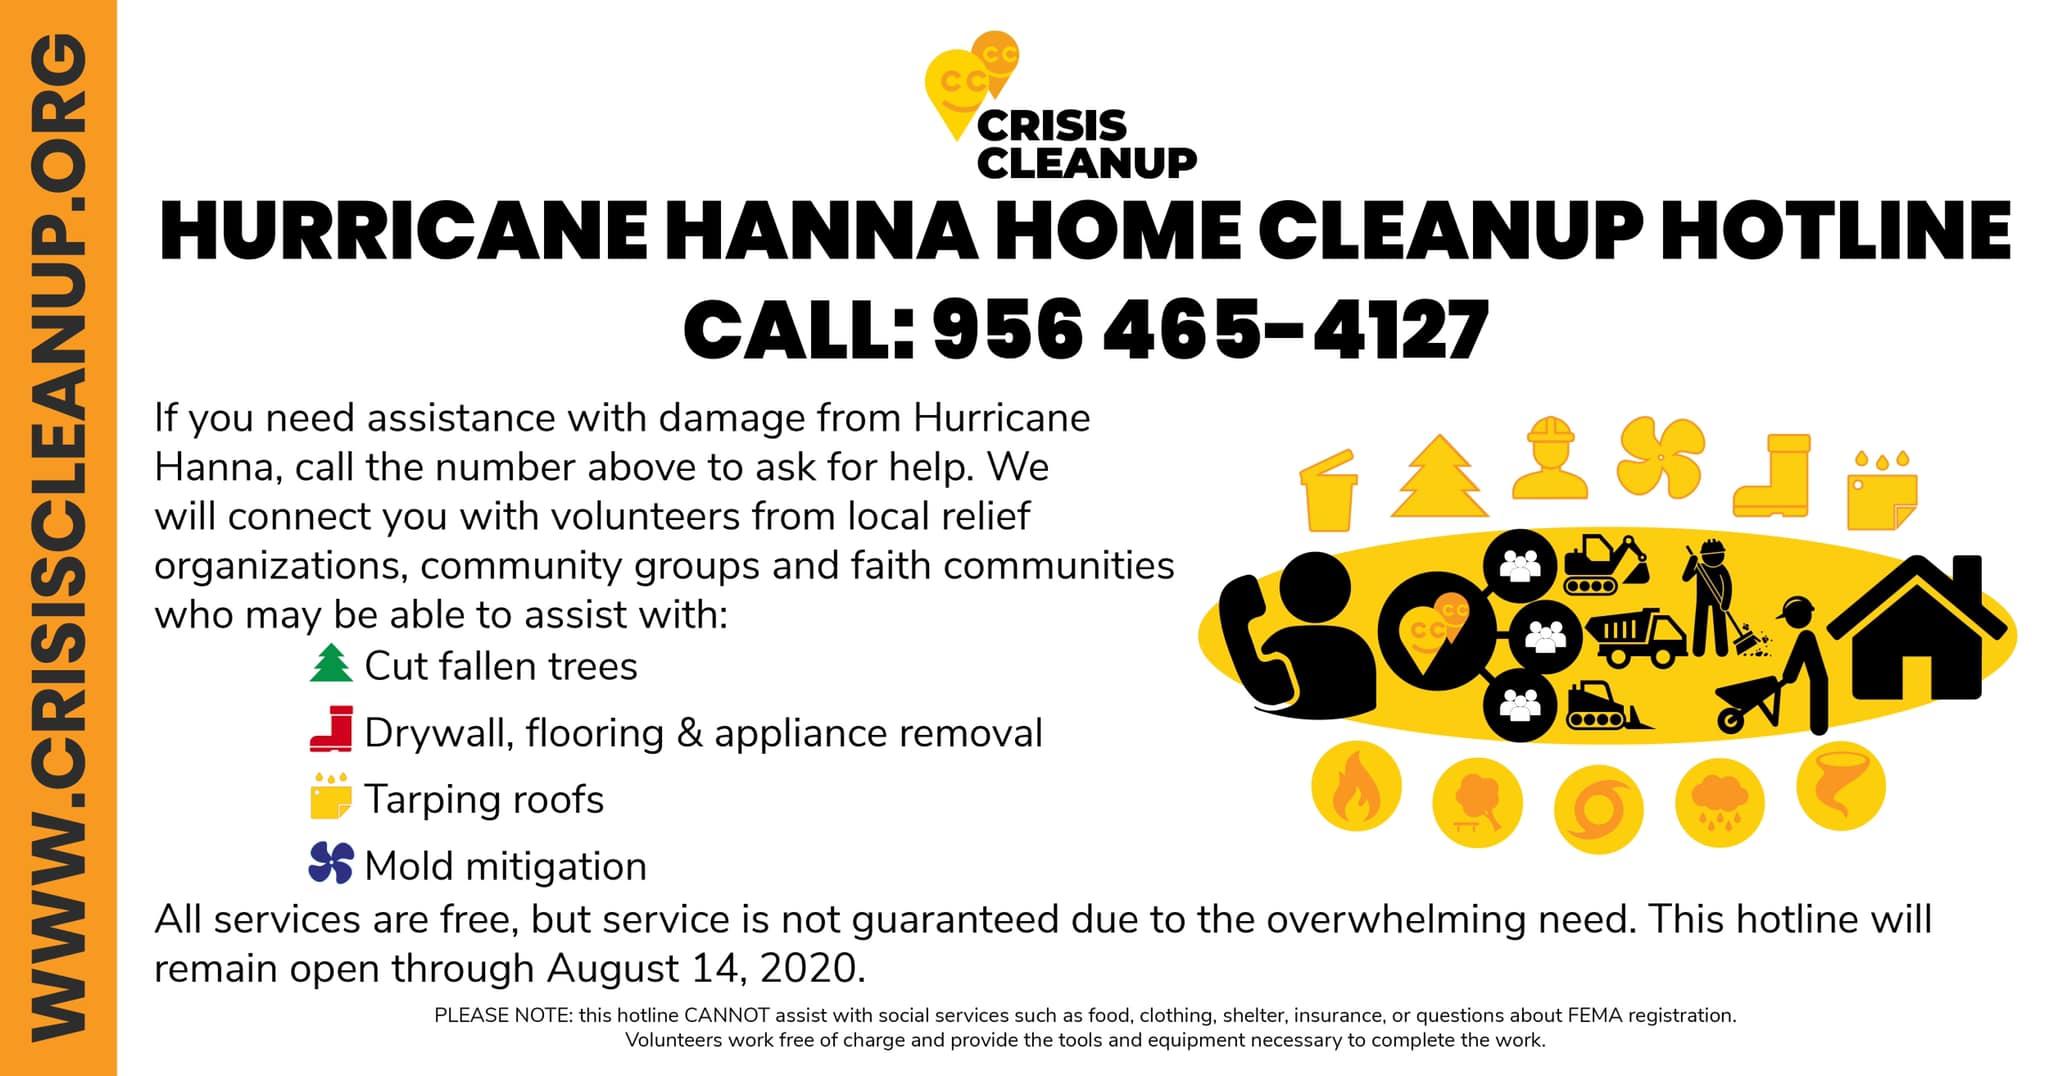 Crisis Cleanup Info